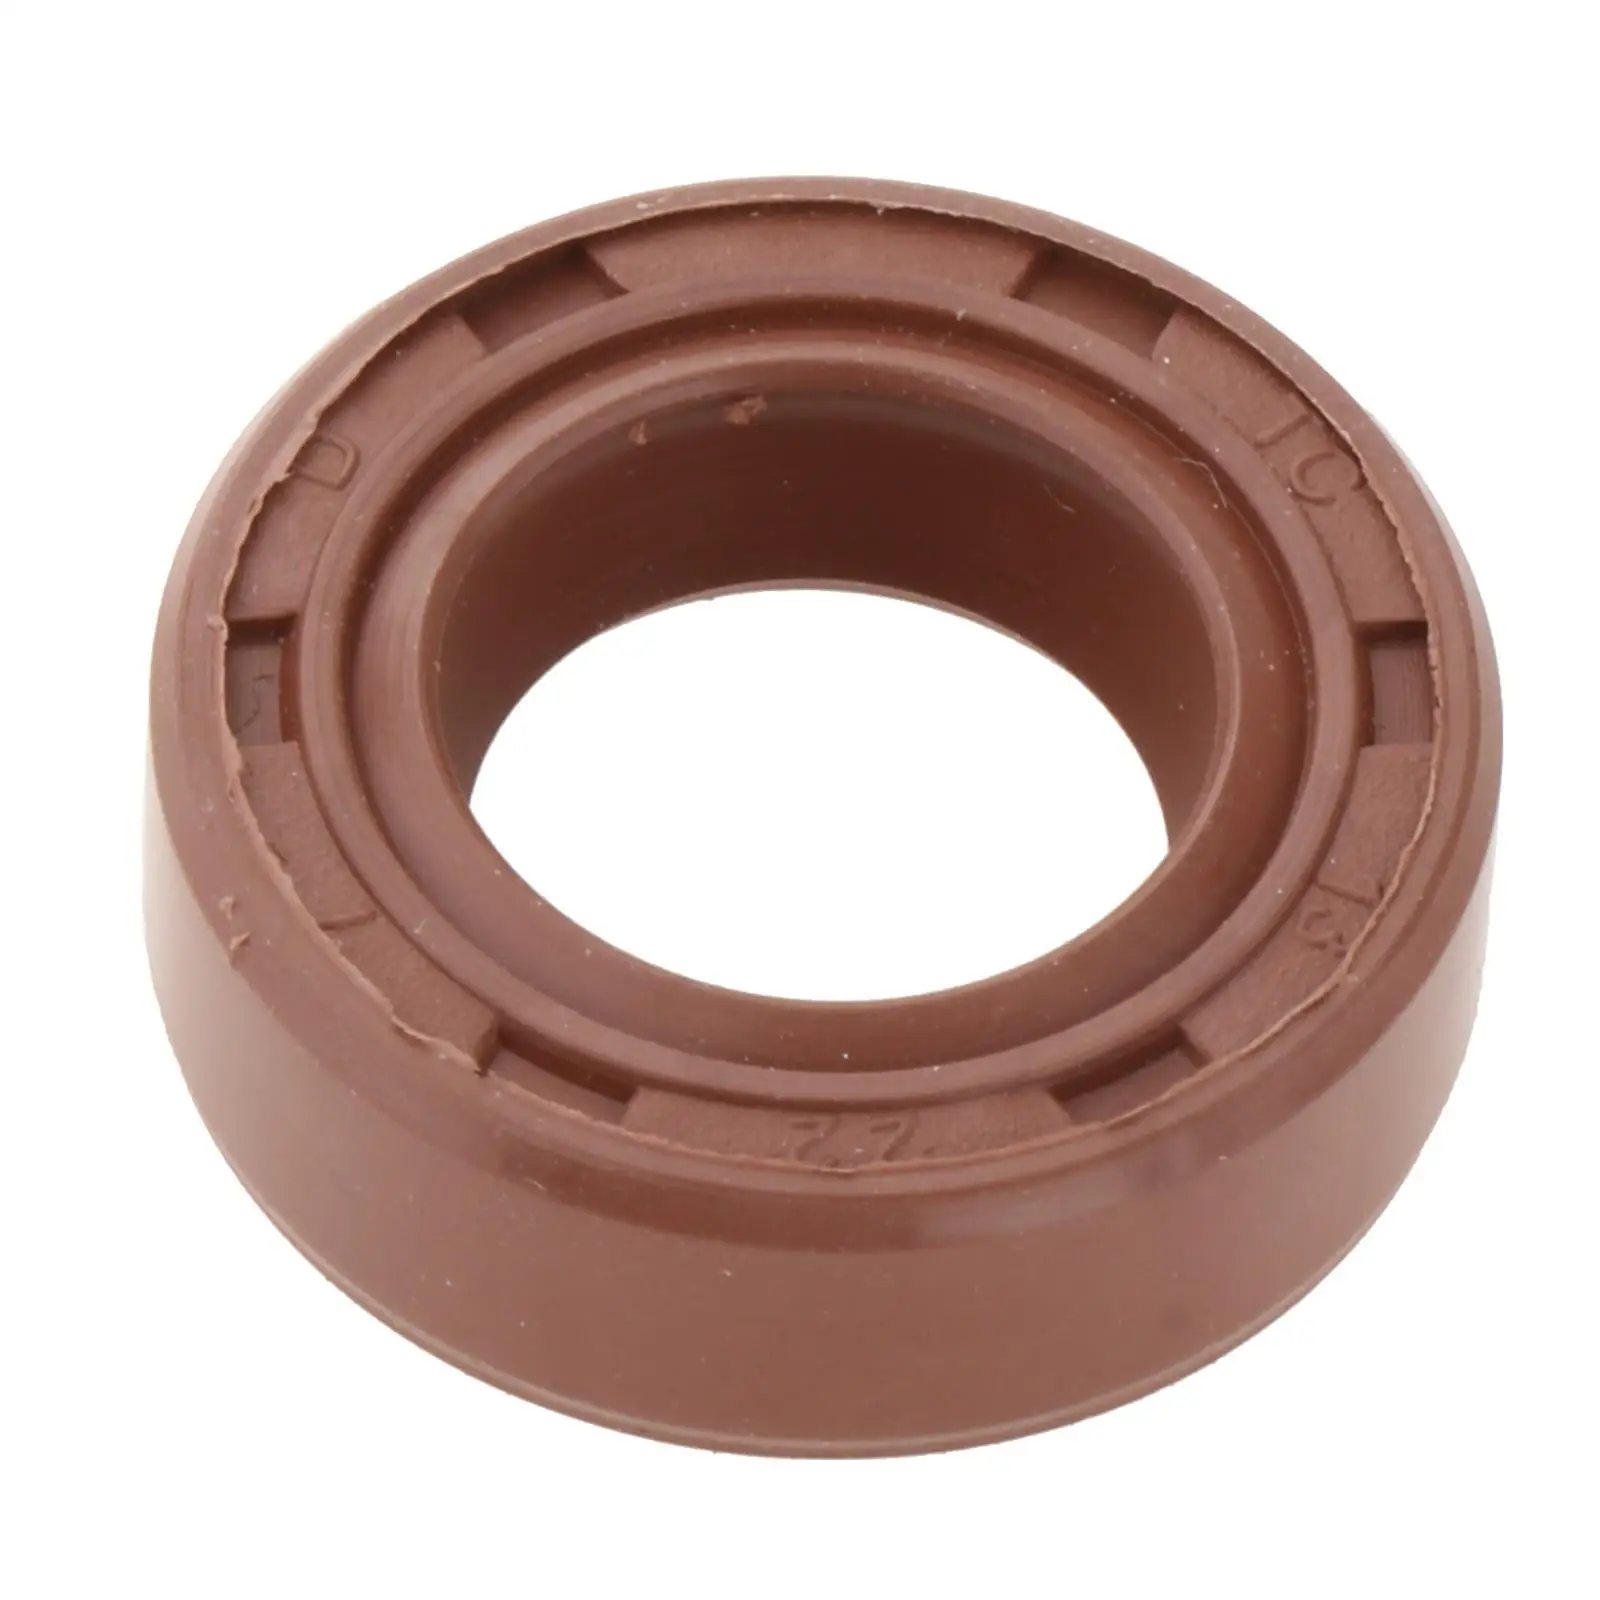 93101-13M12 933-0600423-00 9310113M12 Replaces Oil Seal for 